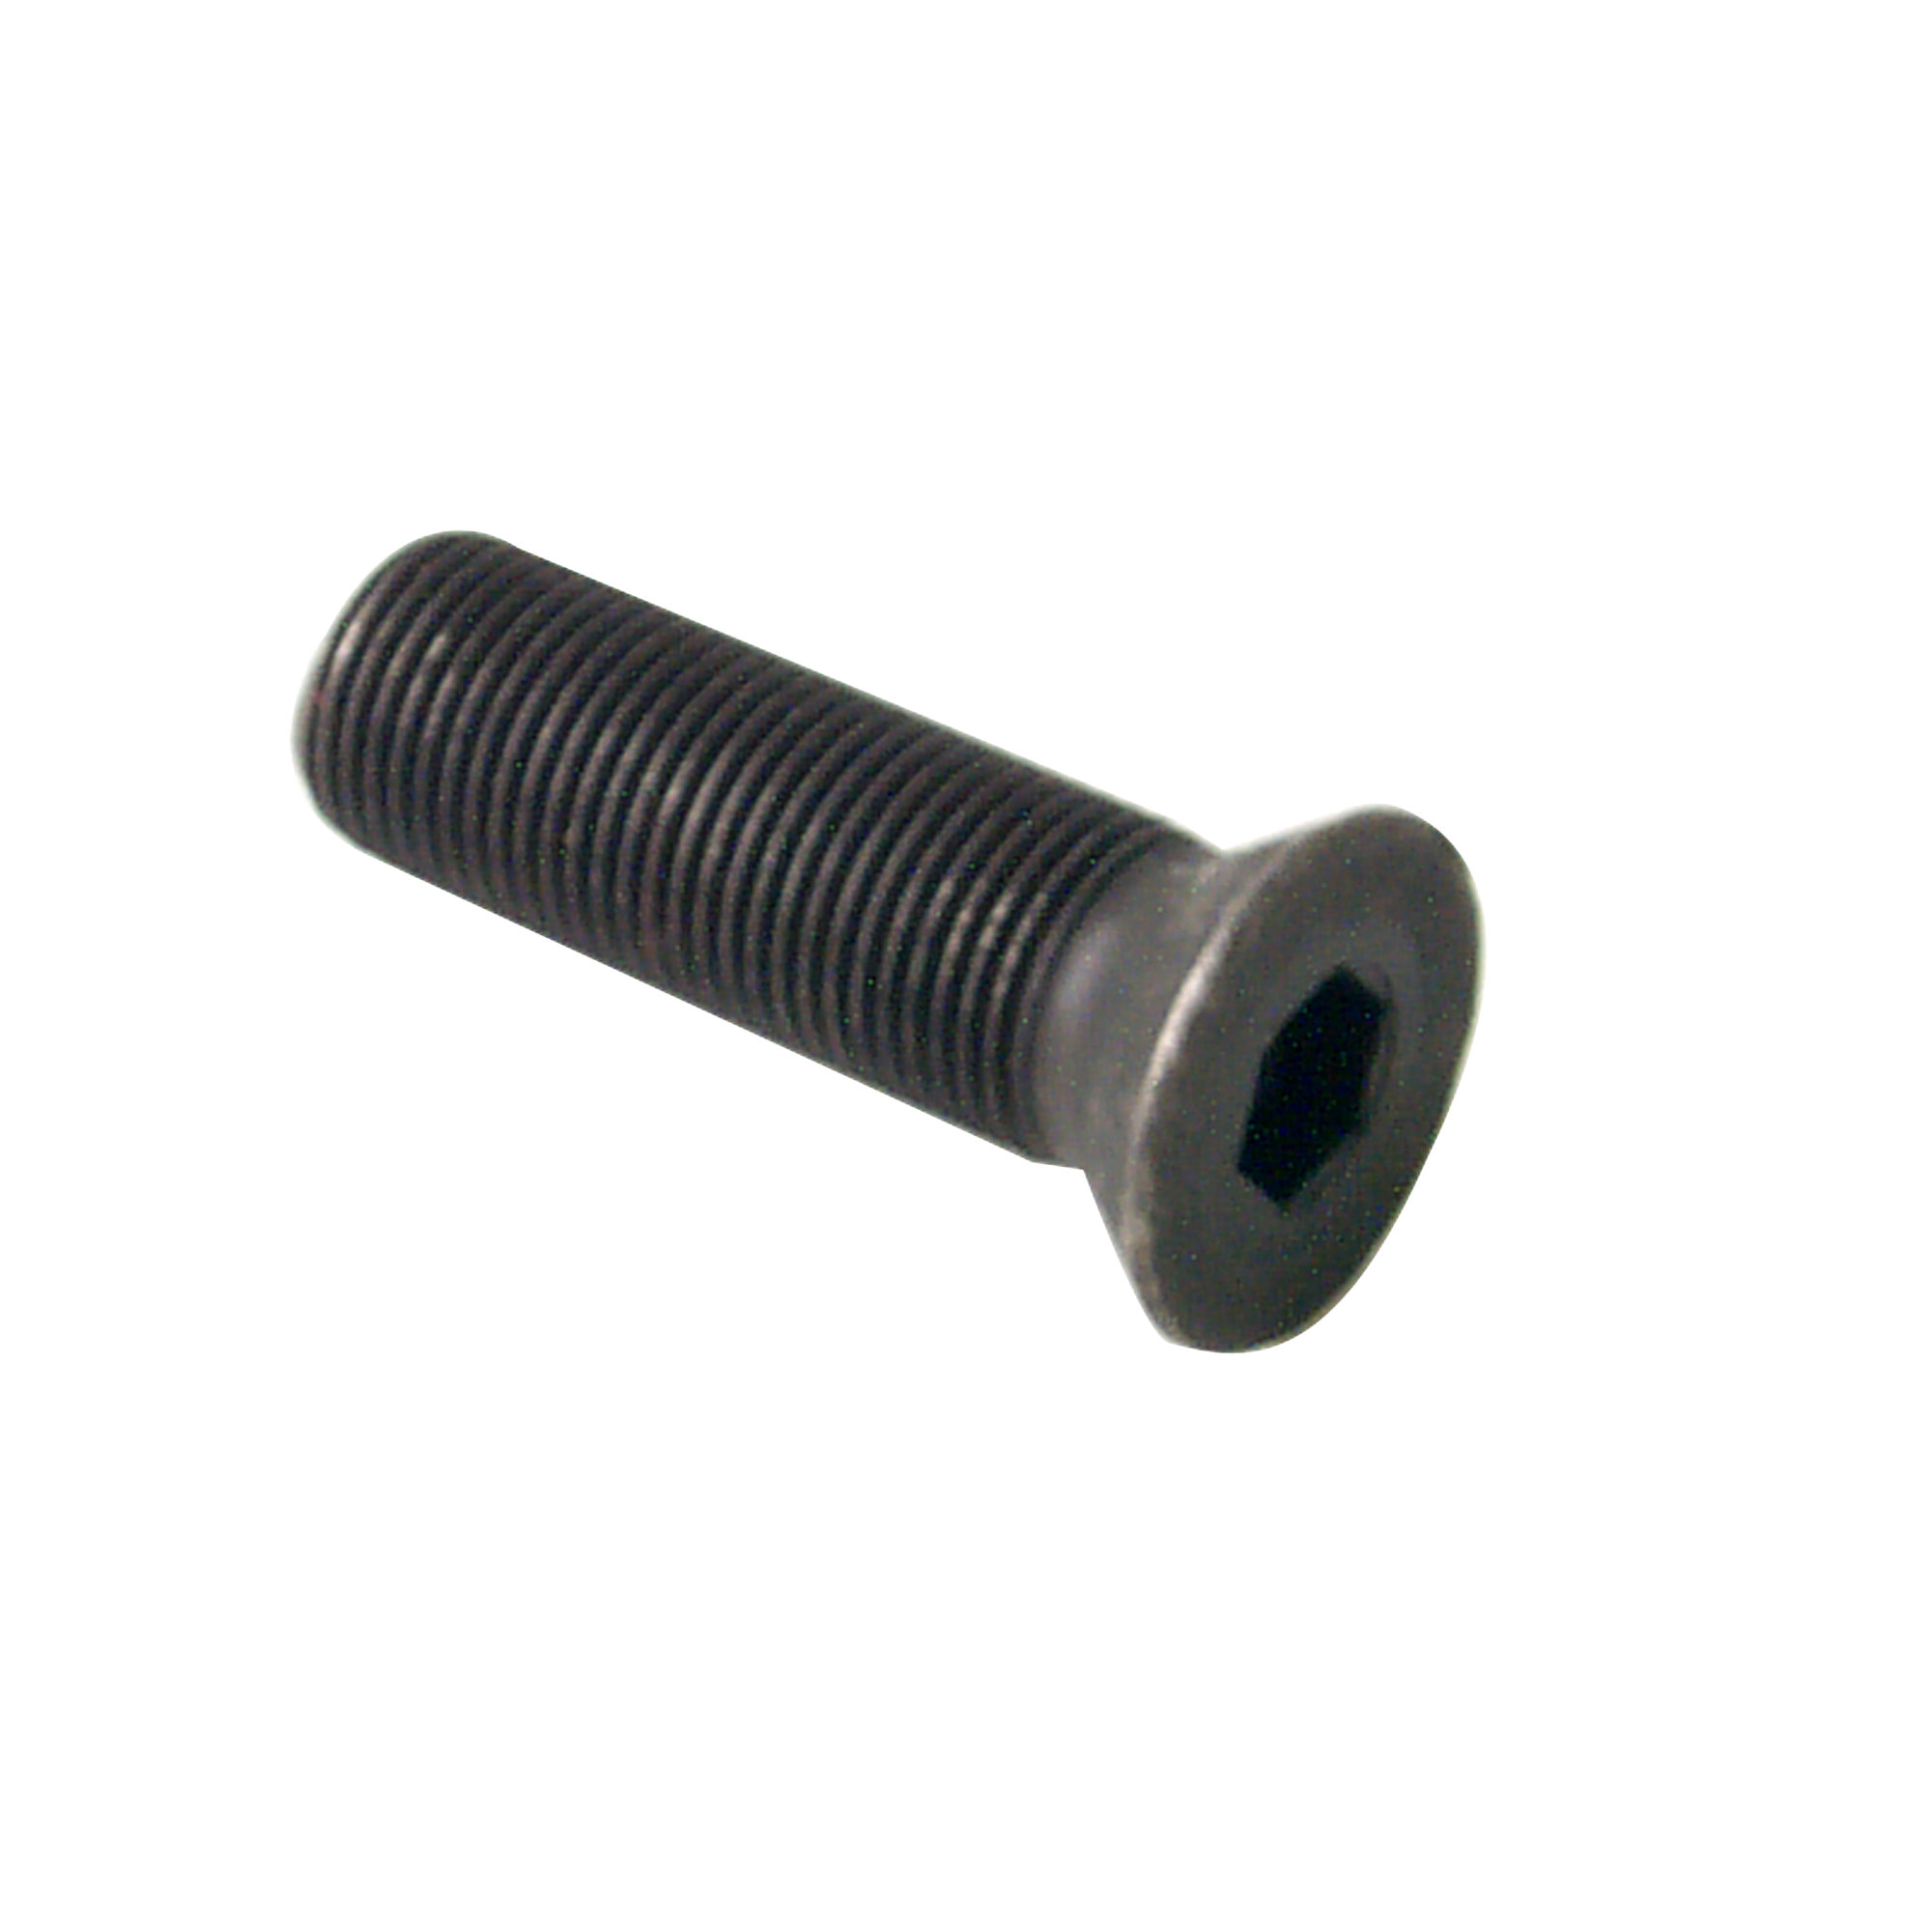 Replacement Bolt for Dumbbell Handles